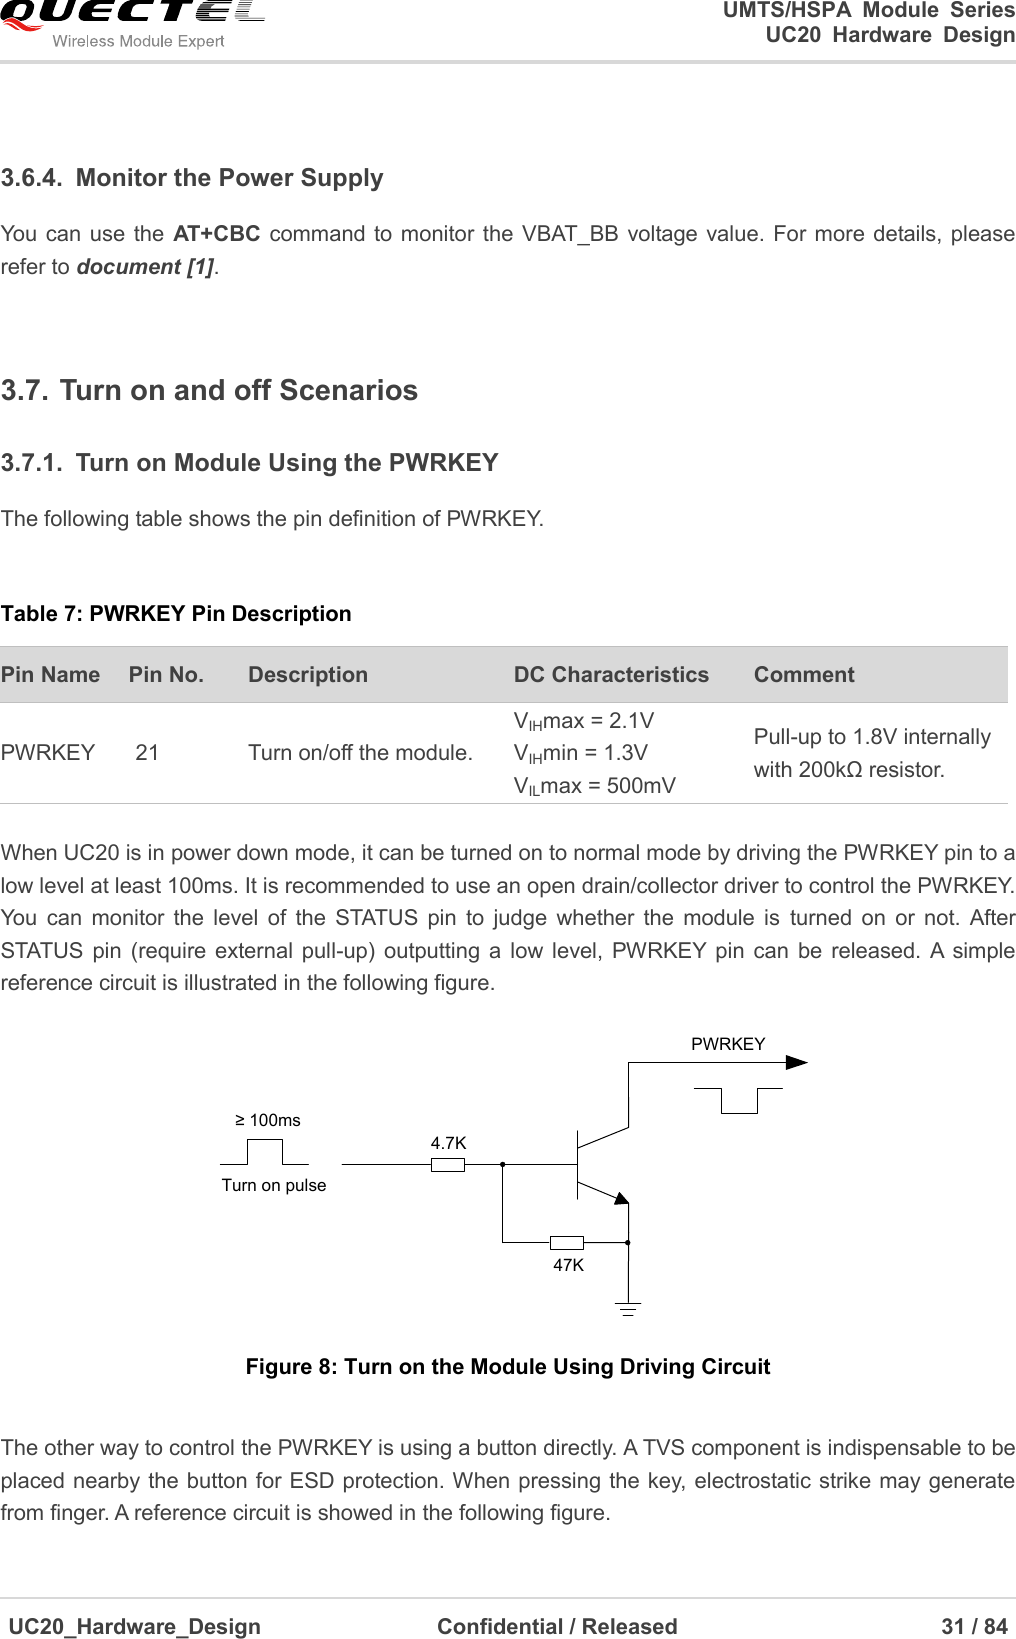                                                                                                                                               UMTS/HSPA  Module  Series                                                                 UC20  Hardware  Design  UC20_Hardware_Design                  Confidential / Released                            31 / 84      3.6.4.  Monitor the Power Supply You can  use the  AT+CBC command to monitor the VBAT_BB voltage value. For  more details, please refer to document [1].    3.7. Turn on and off Scenarios 3.7.1.  Turn on Module Using the PWRKEY The following table shows the pin definition of PWRKEY.  Table 7: PWRKEY Pin Description Pin Name   Pin No. Description DC Characteristics Comment PWRKEY 21 Turn on/off the module. VIHmax = 2.1V VIHmin = 1.3V VILmax = 500mV Pull-up to 1.8V internally with 200kΩ resistor.    When UC20 is in power down mode, it can be turned on to normal mode by driving the PWRKEY pin to a low level at least 100ms. It is recommended to use an open drain/collector driver to control the PWRKEY. You  can  monitor  the  level  of  the  STATUS  pin  to  judge  whether  the  module  is  turned  on  or  not.  After STATUS pin  (require  external  pull-up)  outputting  a low  level,  PWRKEY pin  can  be released.  A  simple reference circuit is illustrated in the following figure. Turn on pulsePWRKEY4.7K47K≥ 100ms Figure 8: Turn on the Module Using Driving Circuit  The other way to control the PWRKEY is using a button directly. A TVS component is indispensable to be placed nearby the button for ESD protection. When pressing the key, electrostatic strike may generate from finger. A reference circuit is showed in the following figure. 